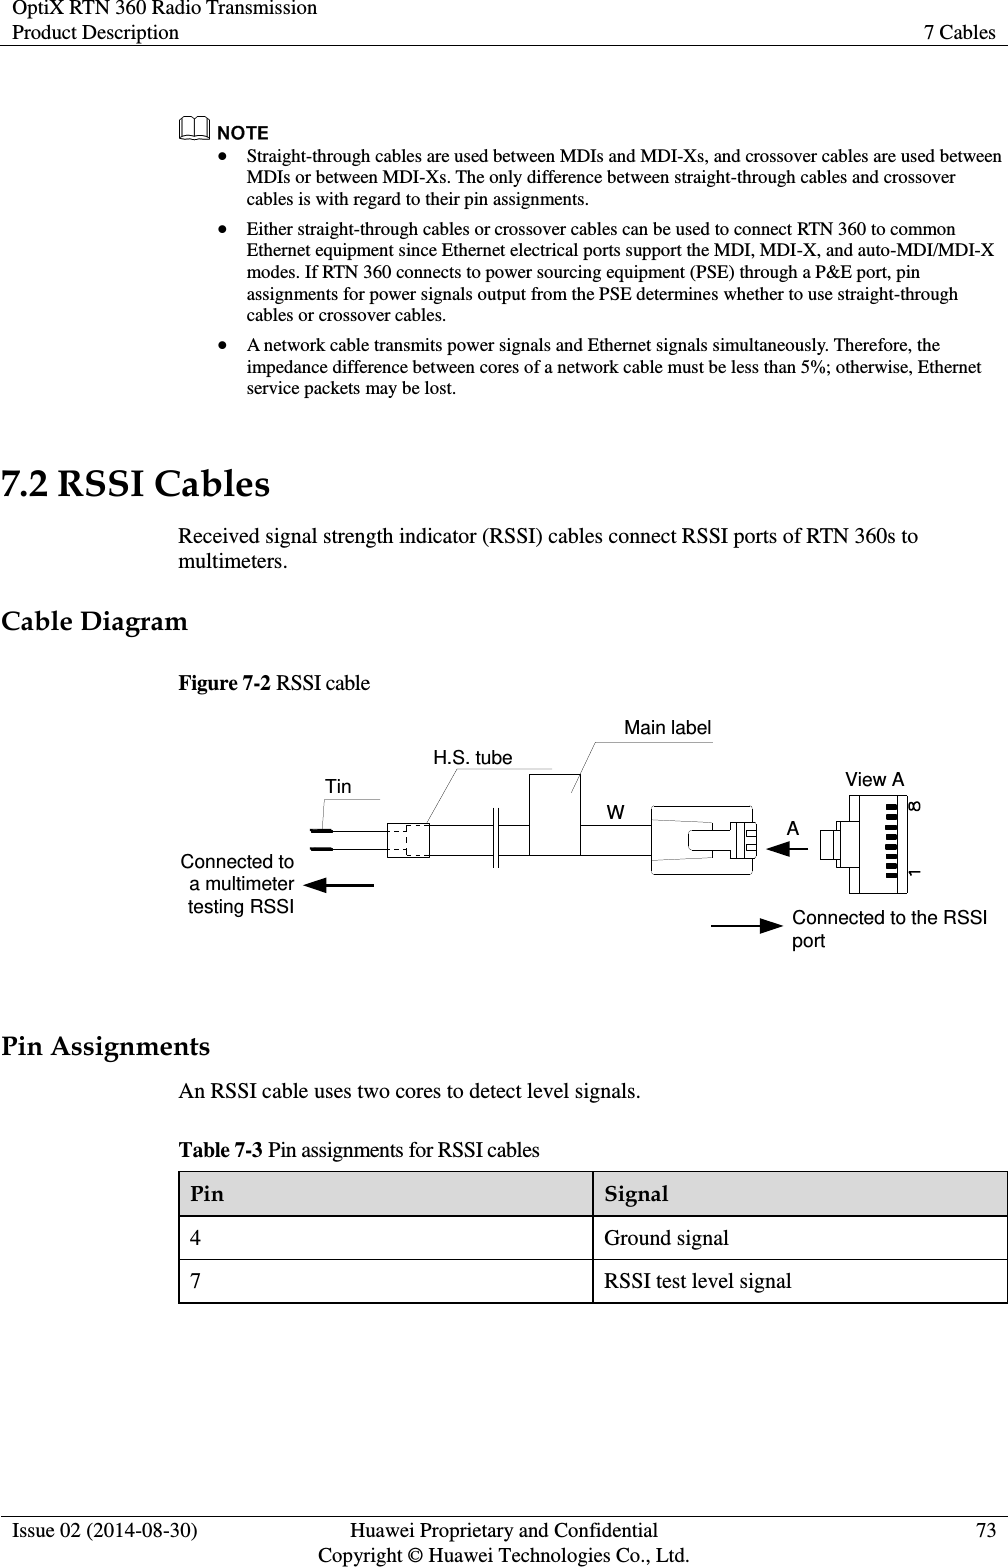 OptiX RTN 360 Radio Transmission Product Description 7 Cables  Issue 02 (2014-08-30) Huawei Proprietary and Confidential                                     Copyright © Huawei Technologies Co., Ltd. 73     Straight-through cables are used between MDIs and MDI-Xs, and crossover cables are used between MDIs or between MDI-Xs. The only difference between straight-through cables and crossover cables is with regard to their pin assignments.  Either straight-through cables or crossover cables can be used to connect RTN 360 to common Ethernet equipment since Ethernet electrical ports support the MDI, MDI-X, and auto-MDI/MDI-X modes. If RTN 360 connects to power sourcing equipment (PSE) through a P&amp;E port, pin assignments for power signals output from the PSE determines whether to use straight-through cables or crossover cables.  A network cable transmits power signals and Ethernet signals simultaneously. Therefore, the impedance difference between cores of a network cable must be less than 5%; otherwise, Ethernet service packets may be lost. 7.2 RSSI Cables Received signal strength indicator (RSSI) cables connect RSSI ports of RTN 360s to multimeters. Cable Diagram Figure 7-2 RSSI cable Connected to a multimeter testing RSSI Connected to the RSSI portTinH.S. tubeMain labelView AWA  Pin Assignments An RSSI cable uses two cores to detect level signals. Table 7-3 Pin assignments for RSSI cables Pin Signal 4 Ground signal 7 RSSI test level signal  